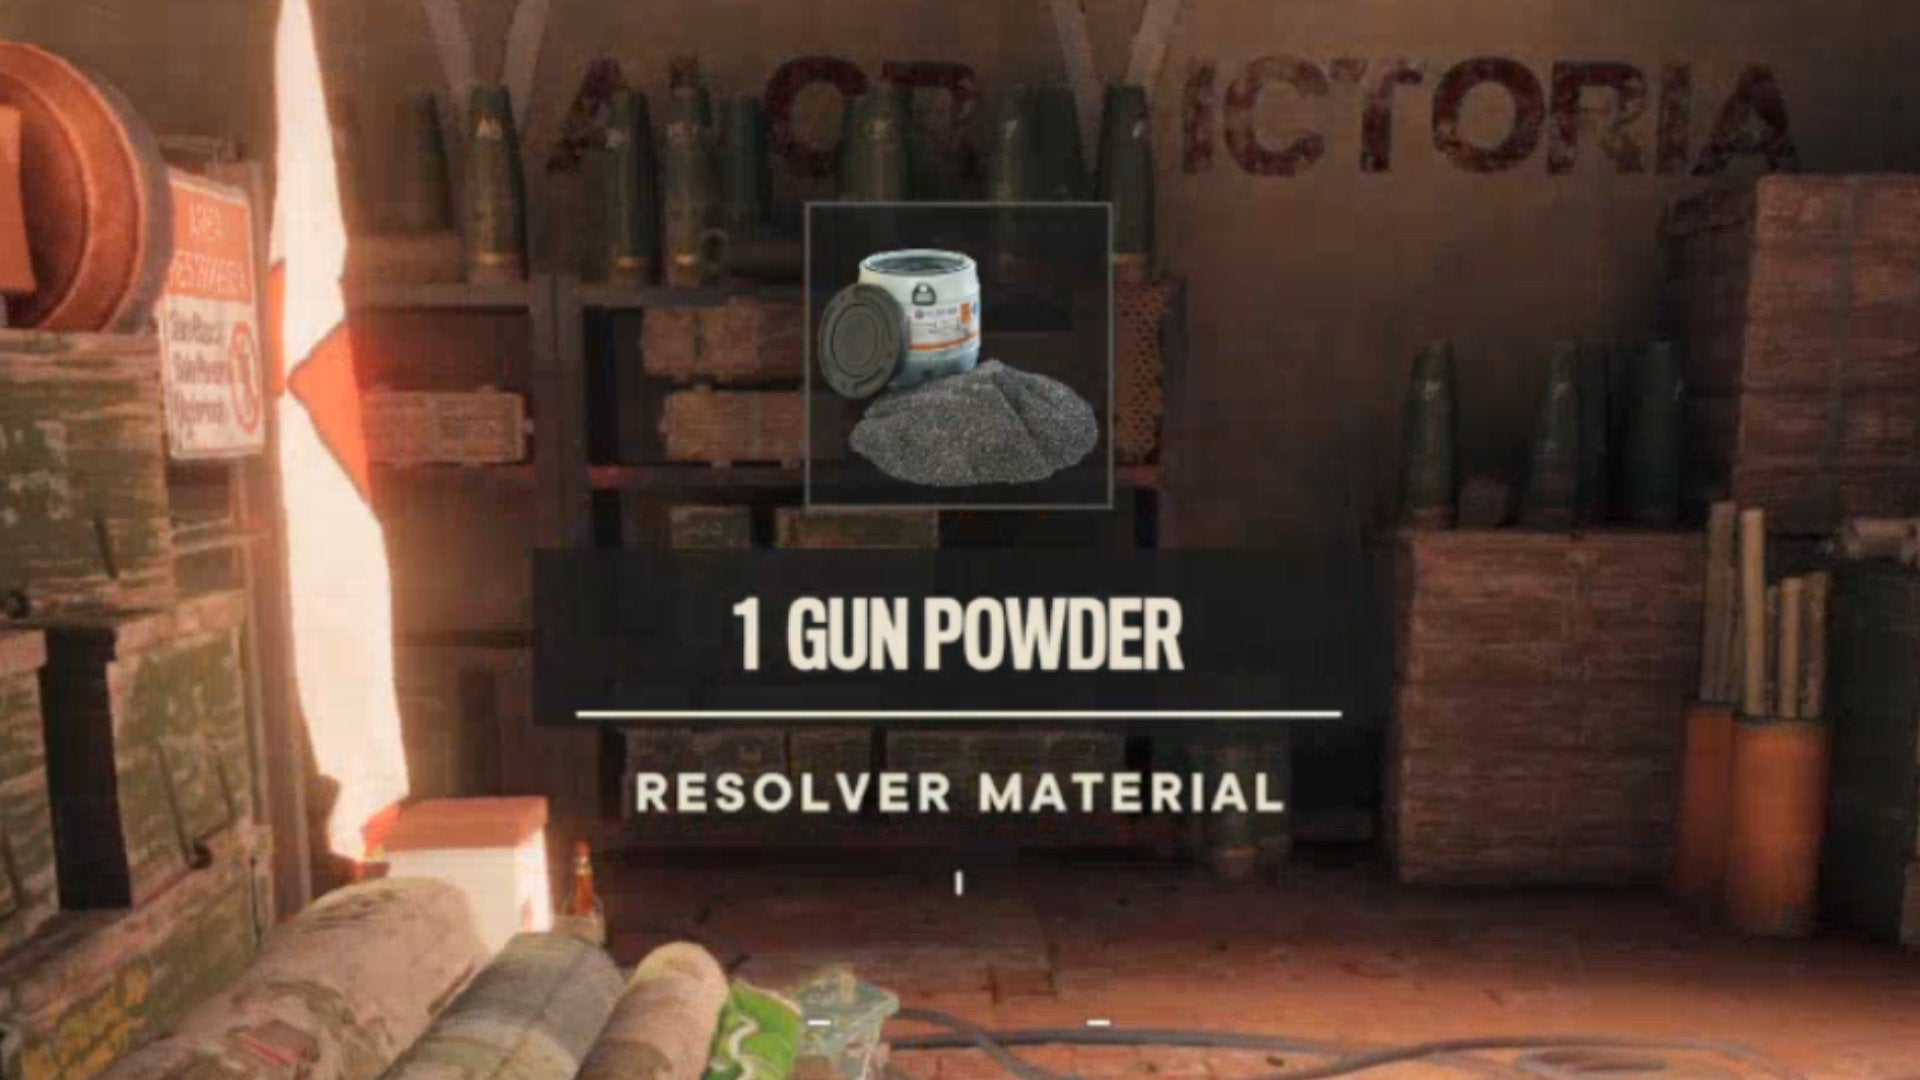 Far Cry 6: a pop-up in the centre of the screen indicates that the player has received 1 Gun Powder.